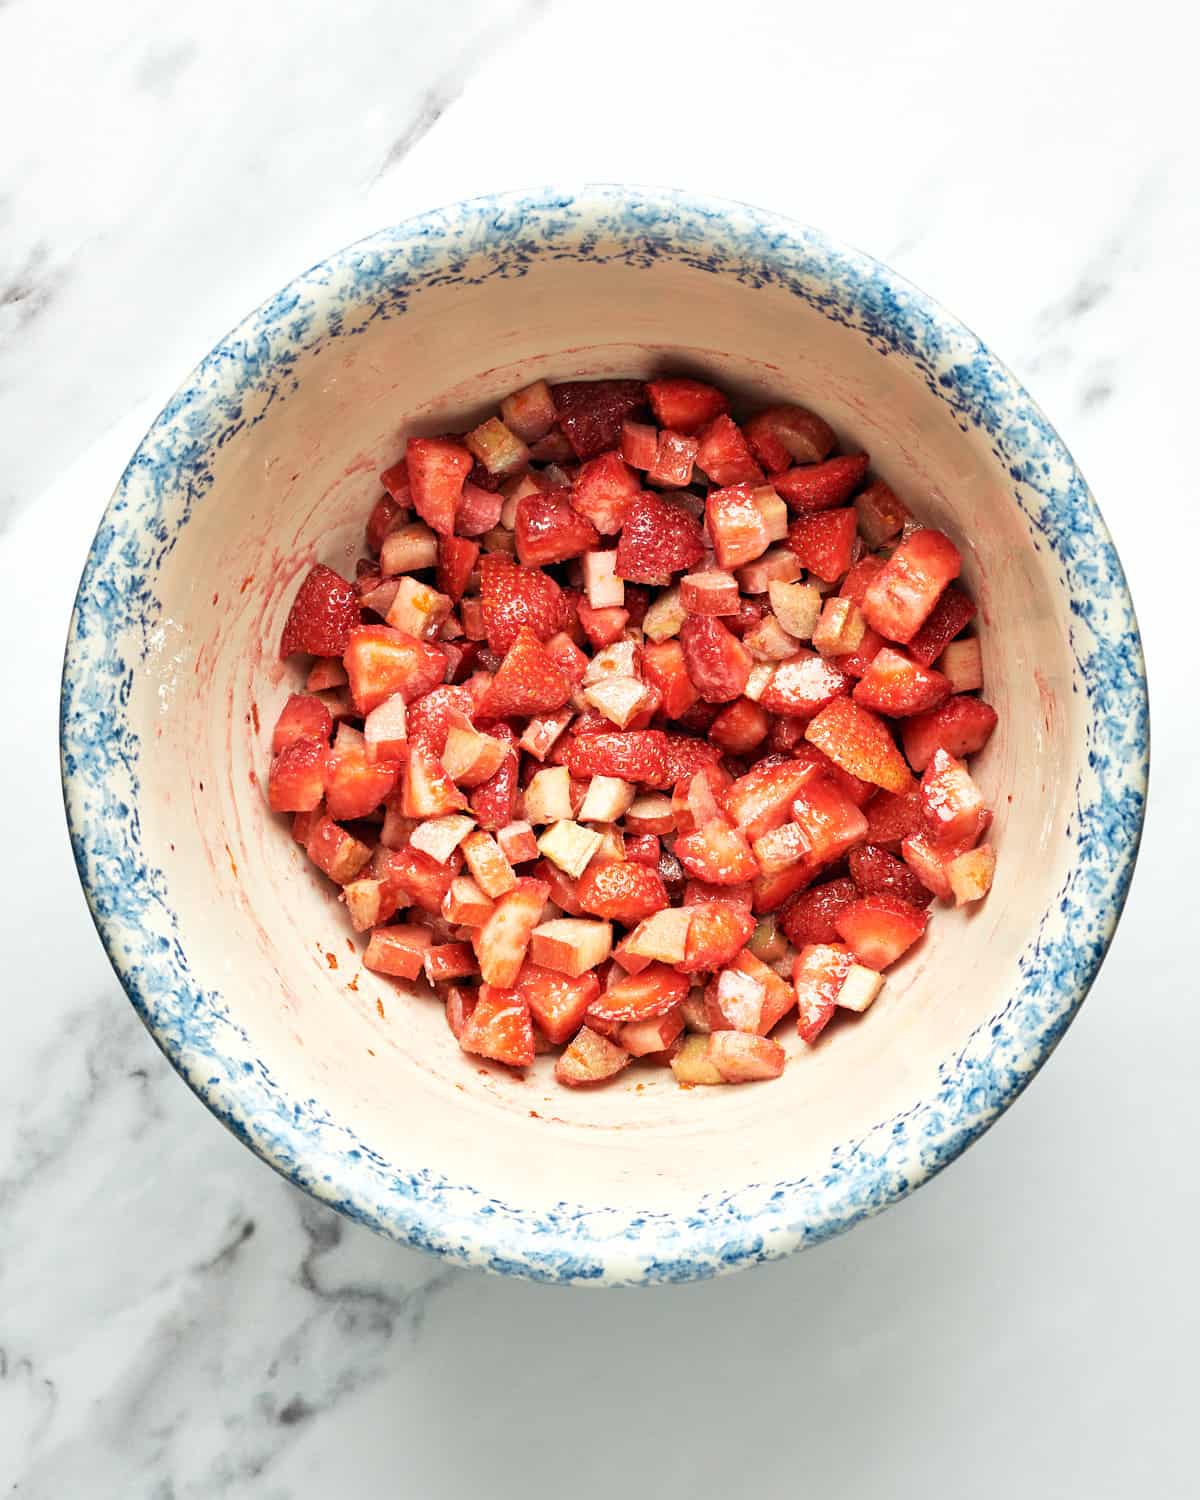 Overhead view of macerating strawberries and rhubarb in a bowl on a marble surface.